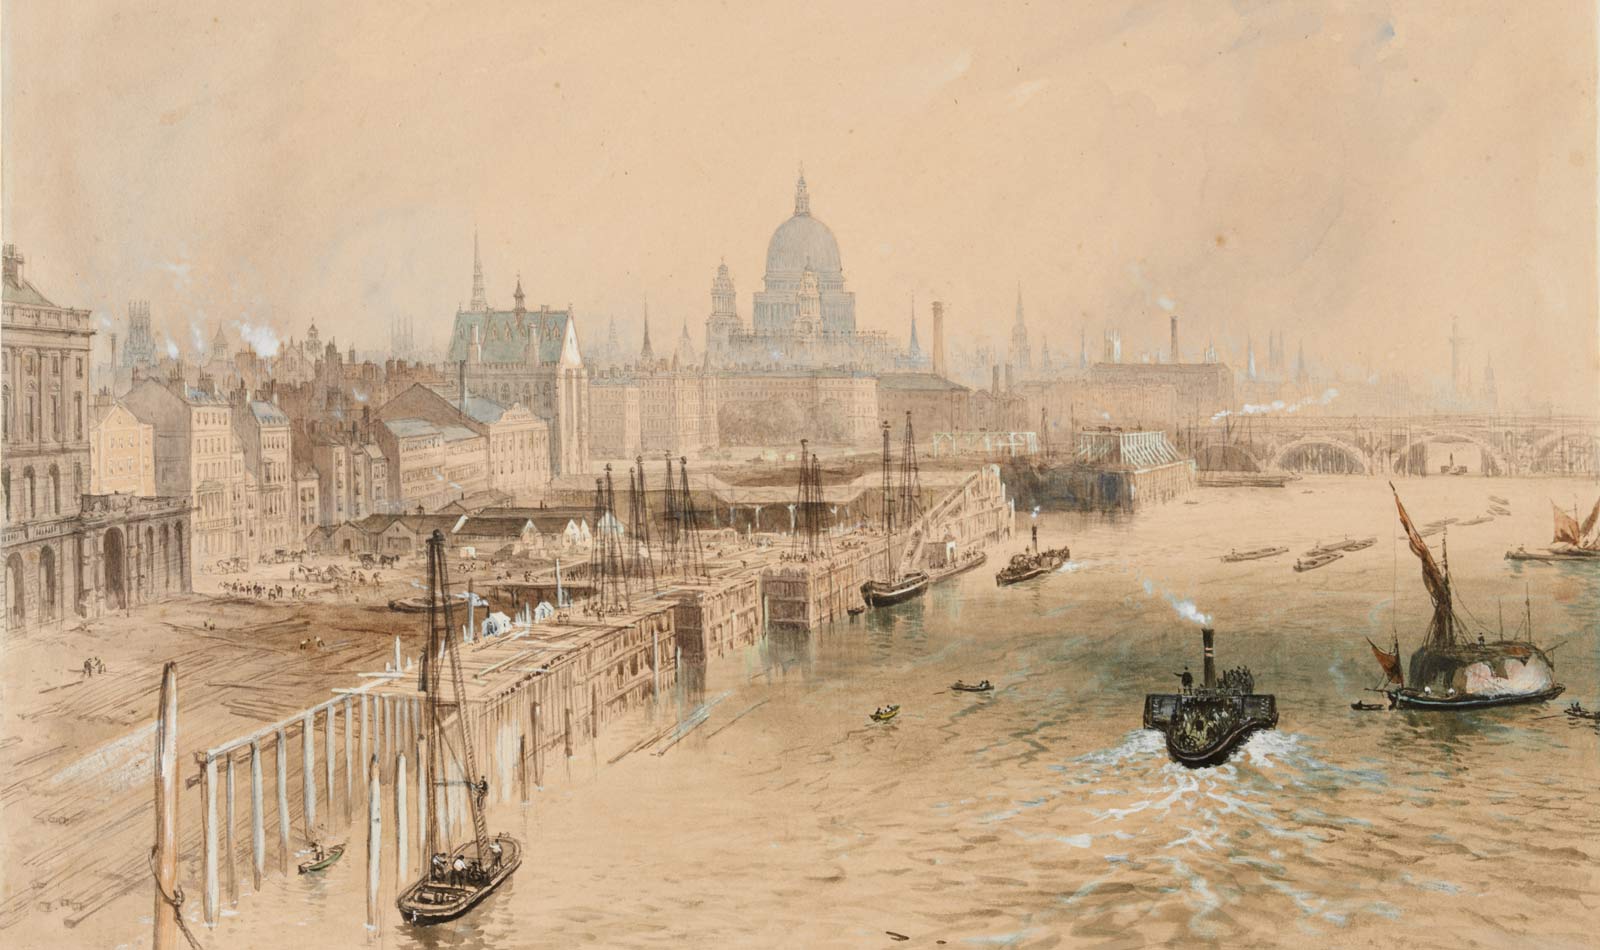 Atmospheric depiction of 'The Thames Embankment Works between Waterloo and Blackfriars Bridges'. Signed and dated. Construction of timber framework for the embankment. Piles of timber lie on shore & figures are at work on shore & on scaffolding. Steam & sailing boats are on river. In distance is Blackfriars Bridge & dome of St. Paul's.  